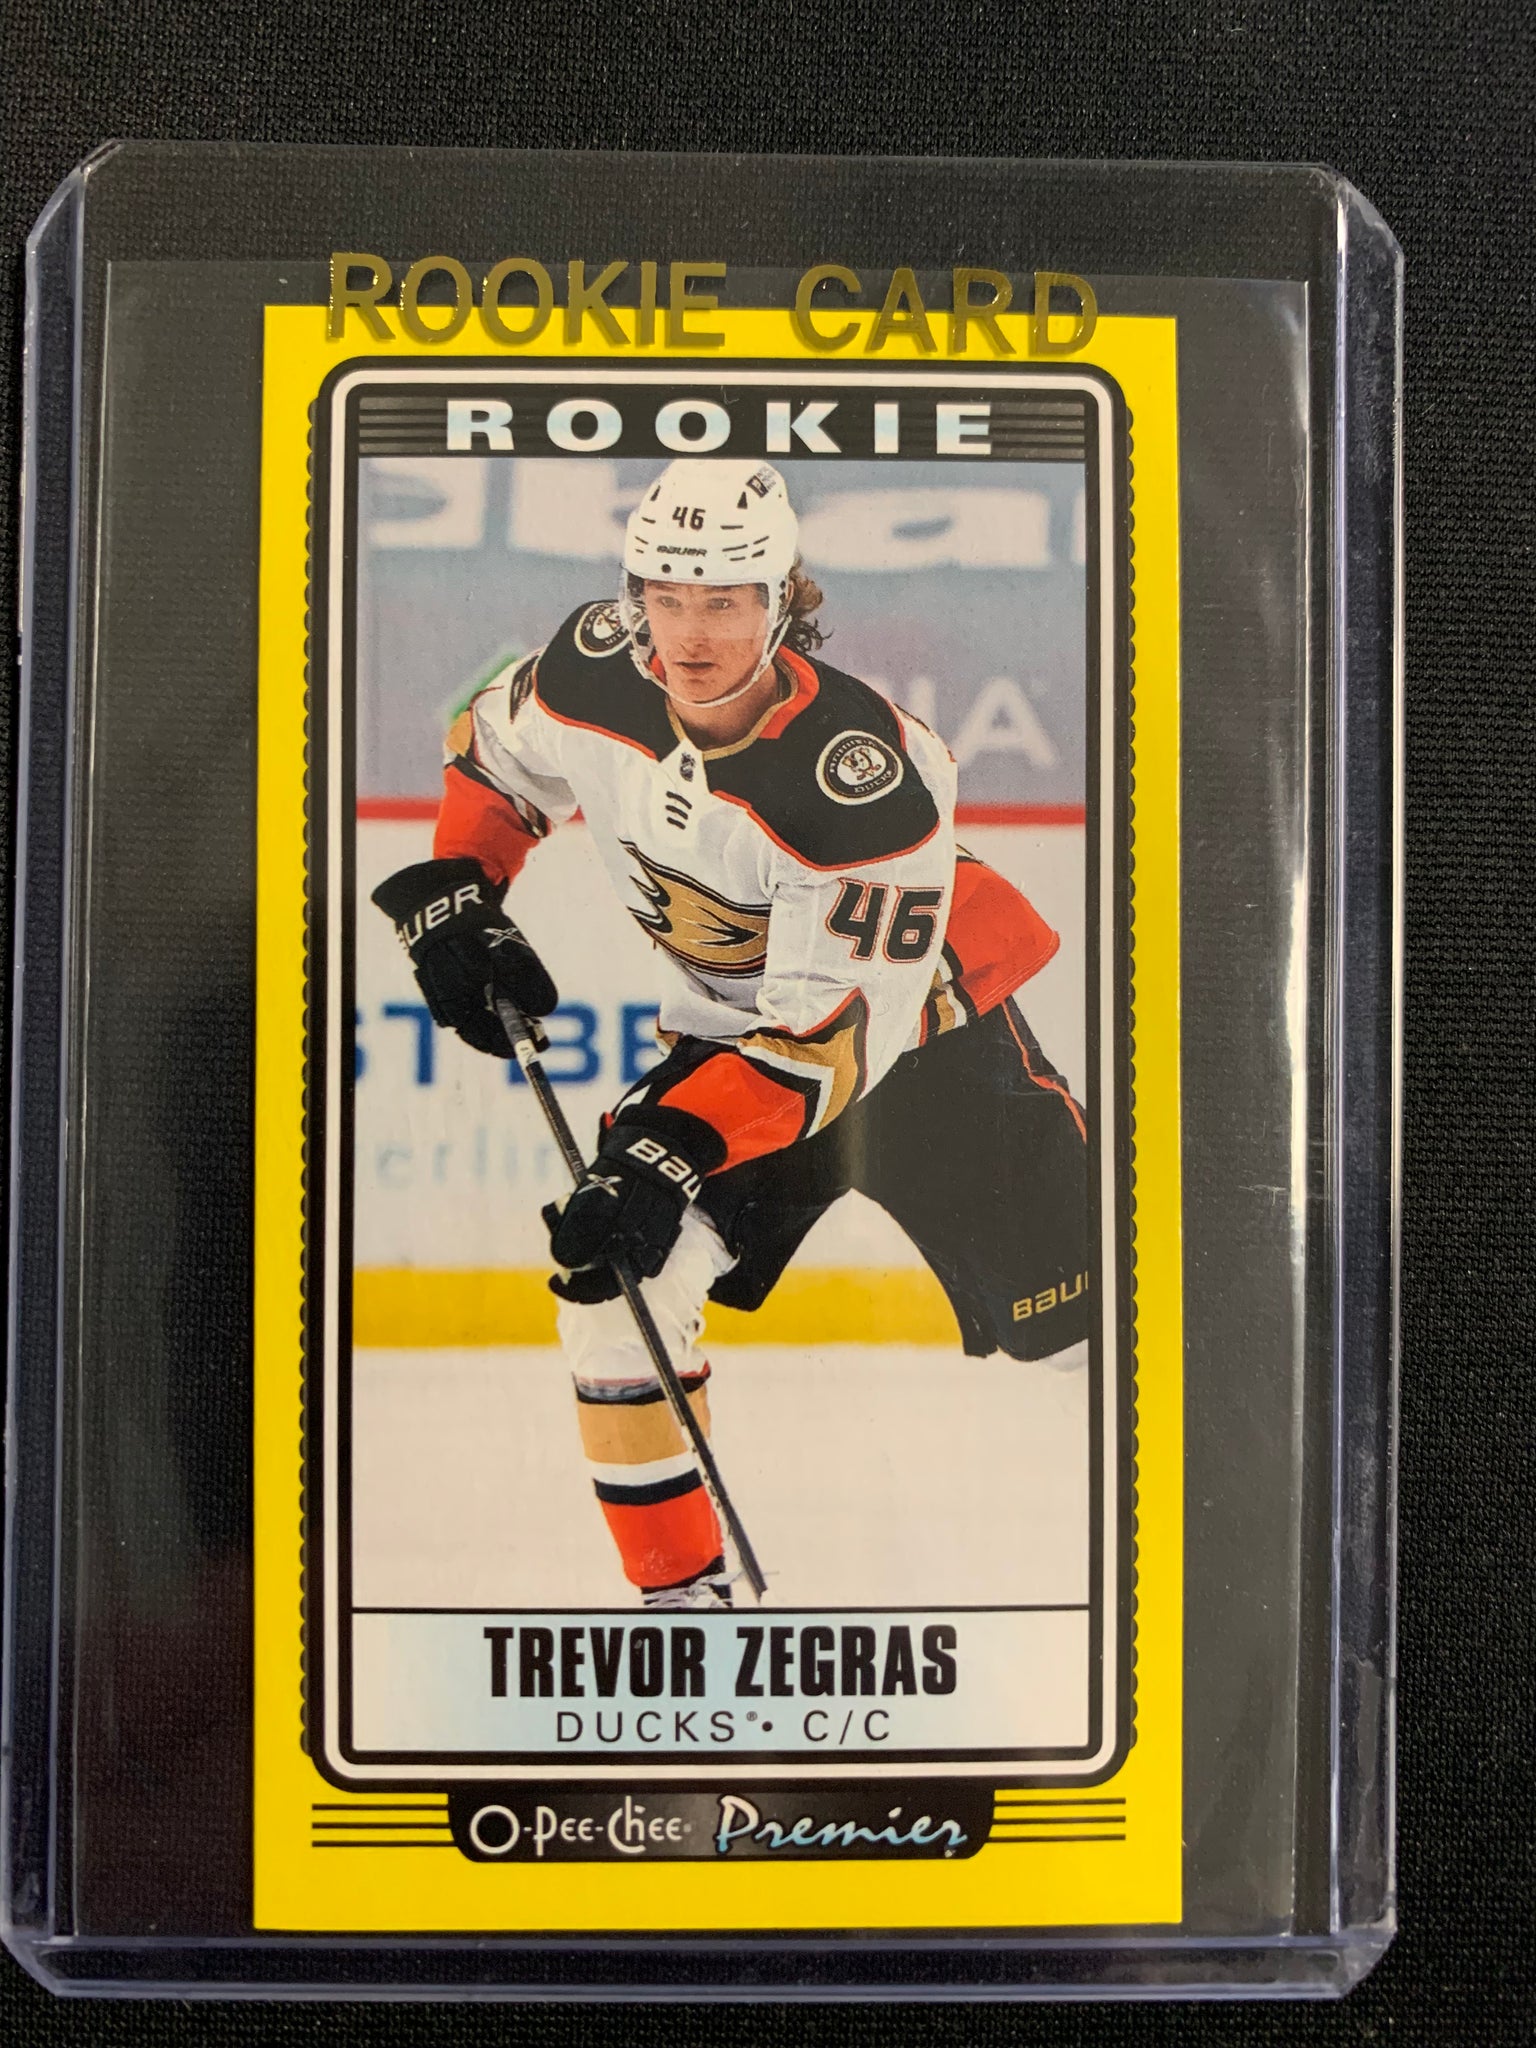  2021-22 O-Pee-Chee Retro #535 Trevor Zegras RC Rookie Card  Anaheim Ducks Official NHL Hockey Card From The Upper Deck Company in Raw  (NM or Better) Condition : Collectibles & Fine Art